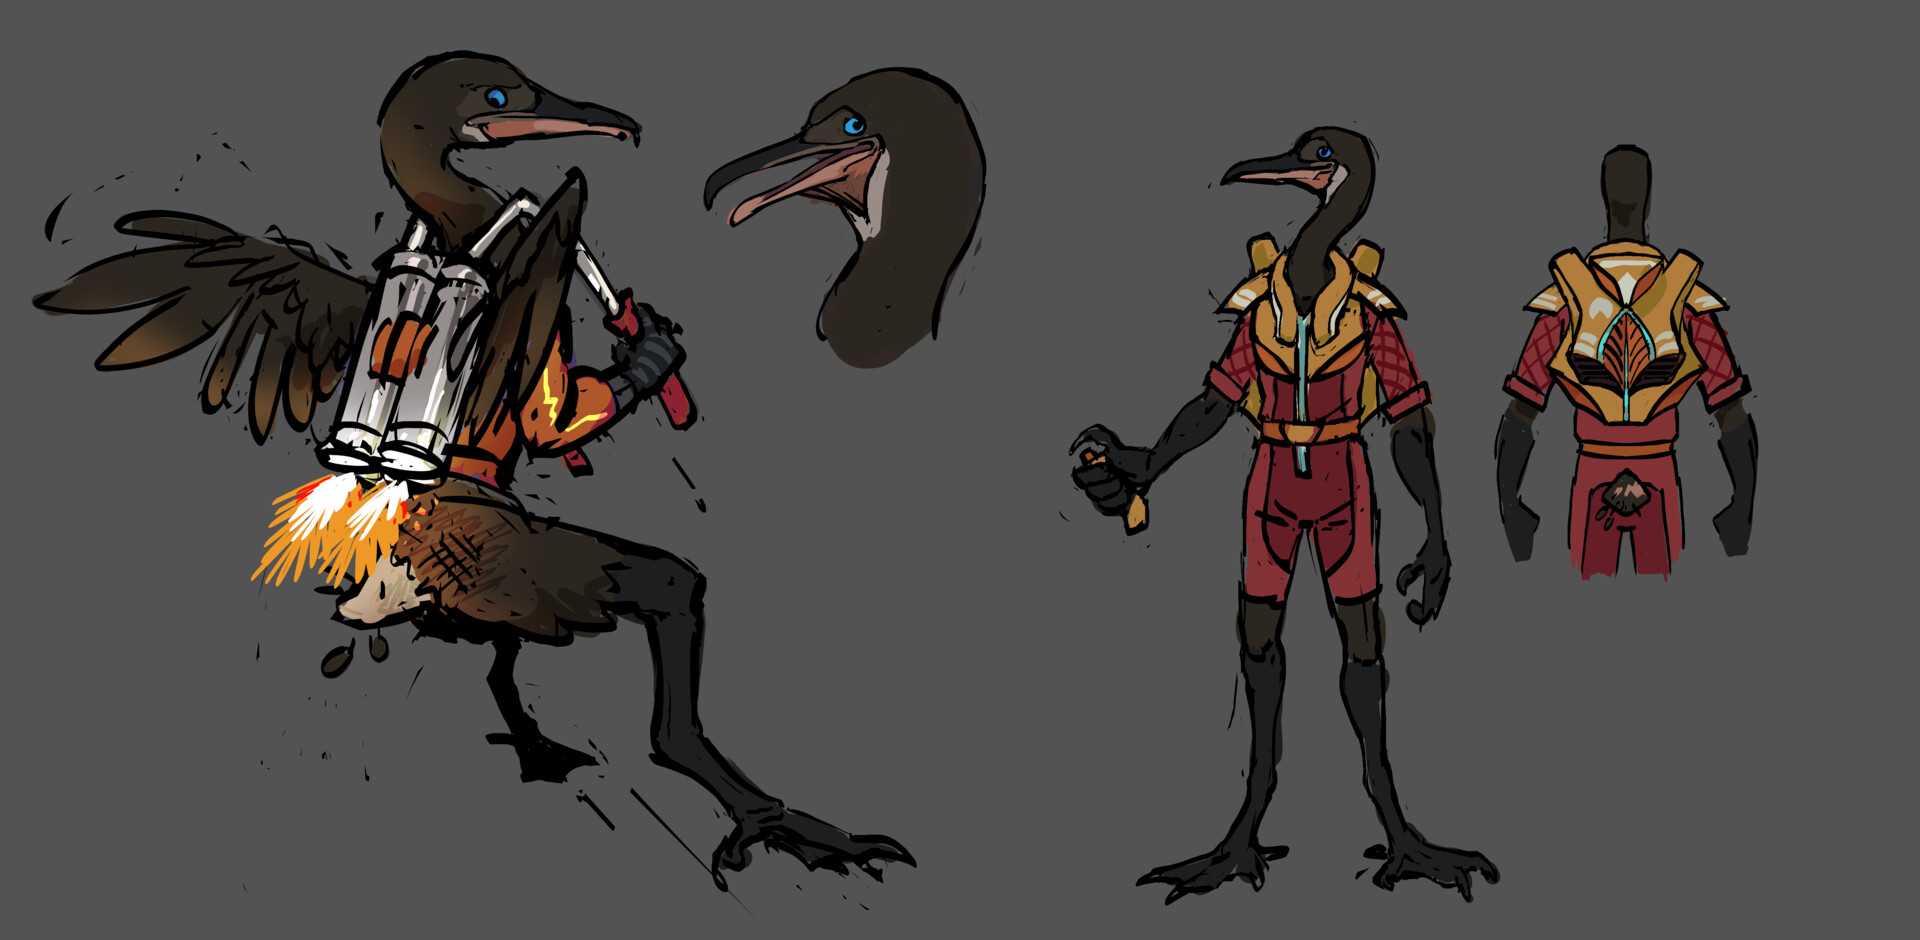 ArtStation - More Sci-fi bird characters for Indie game